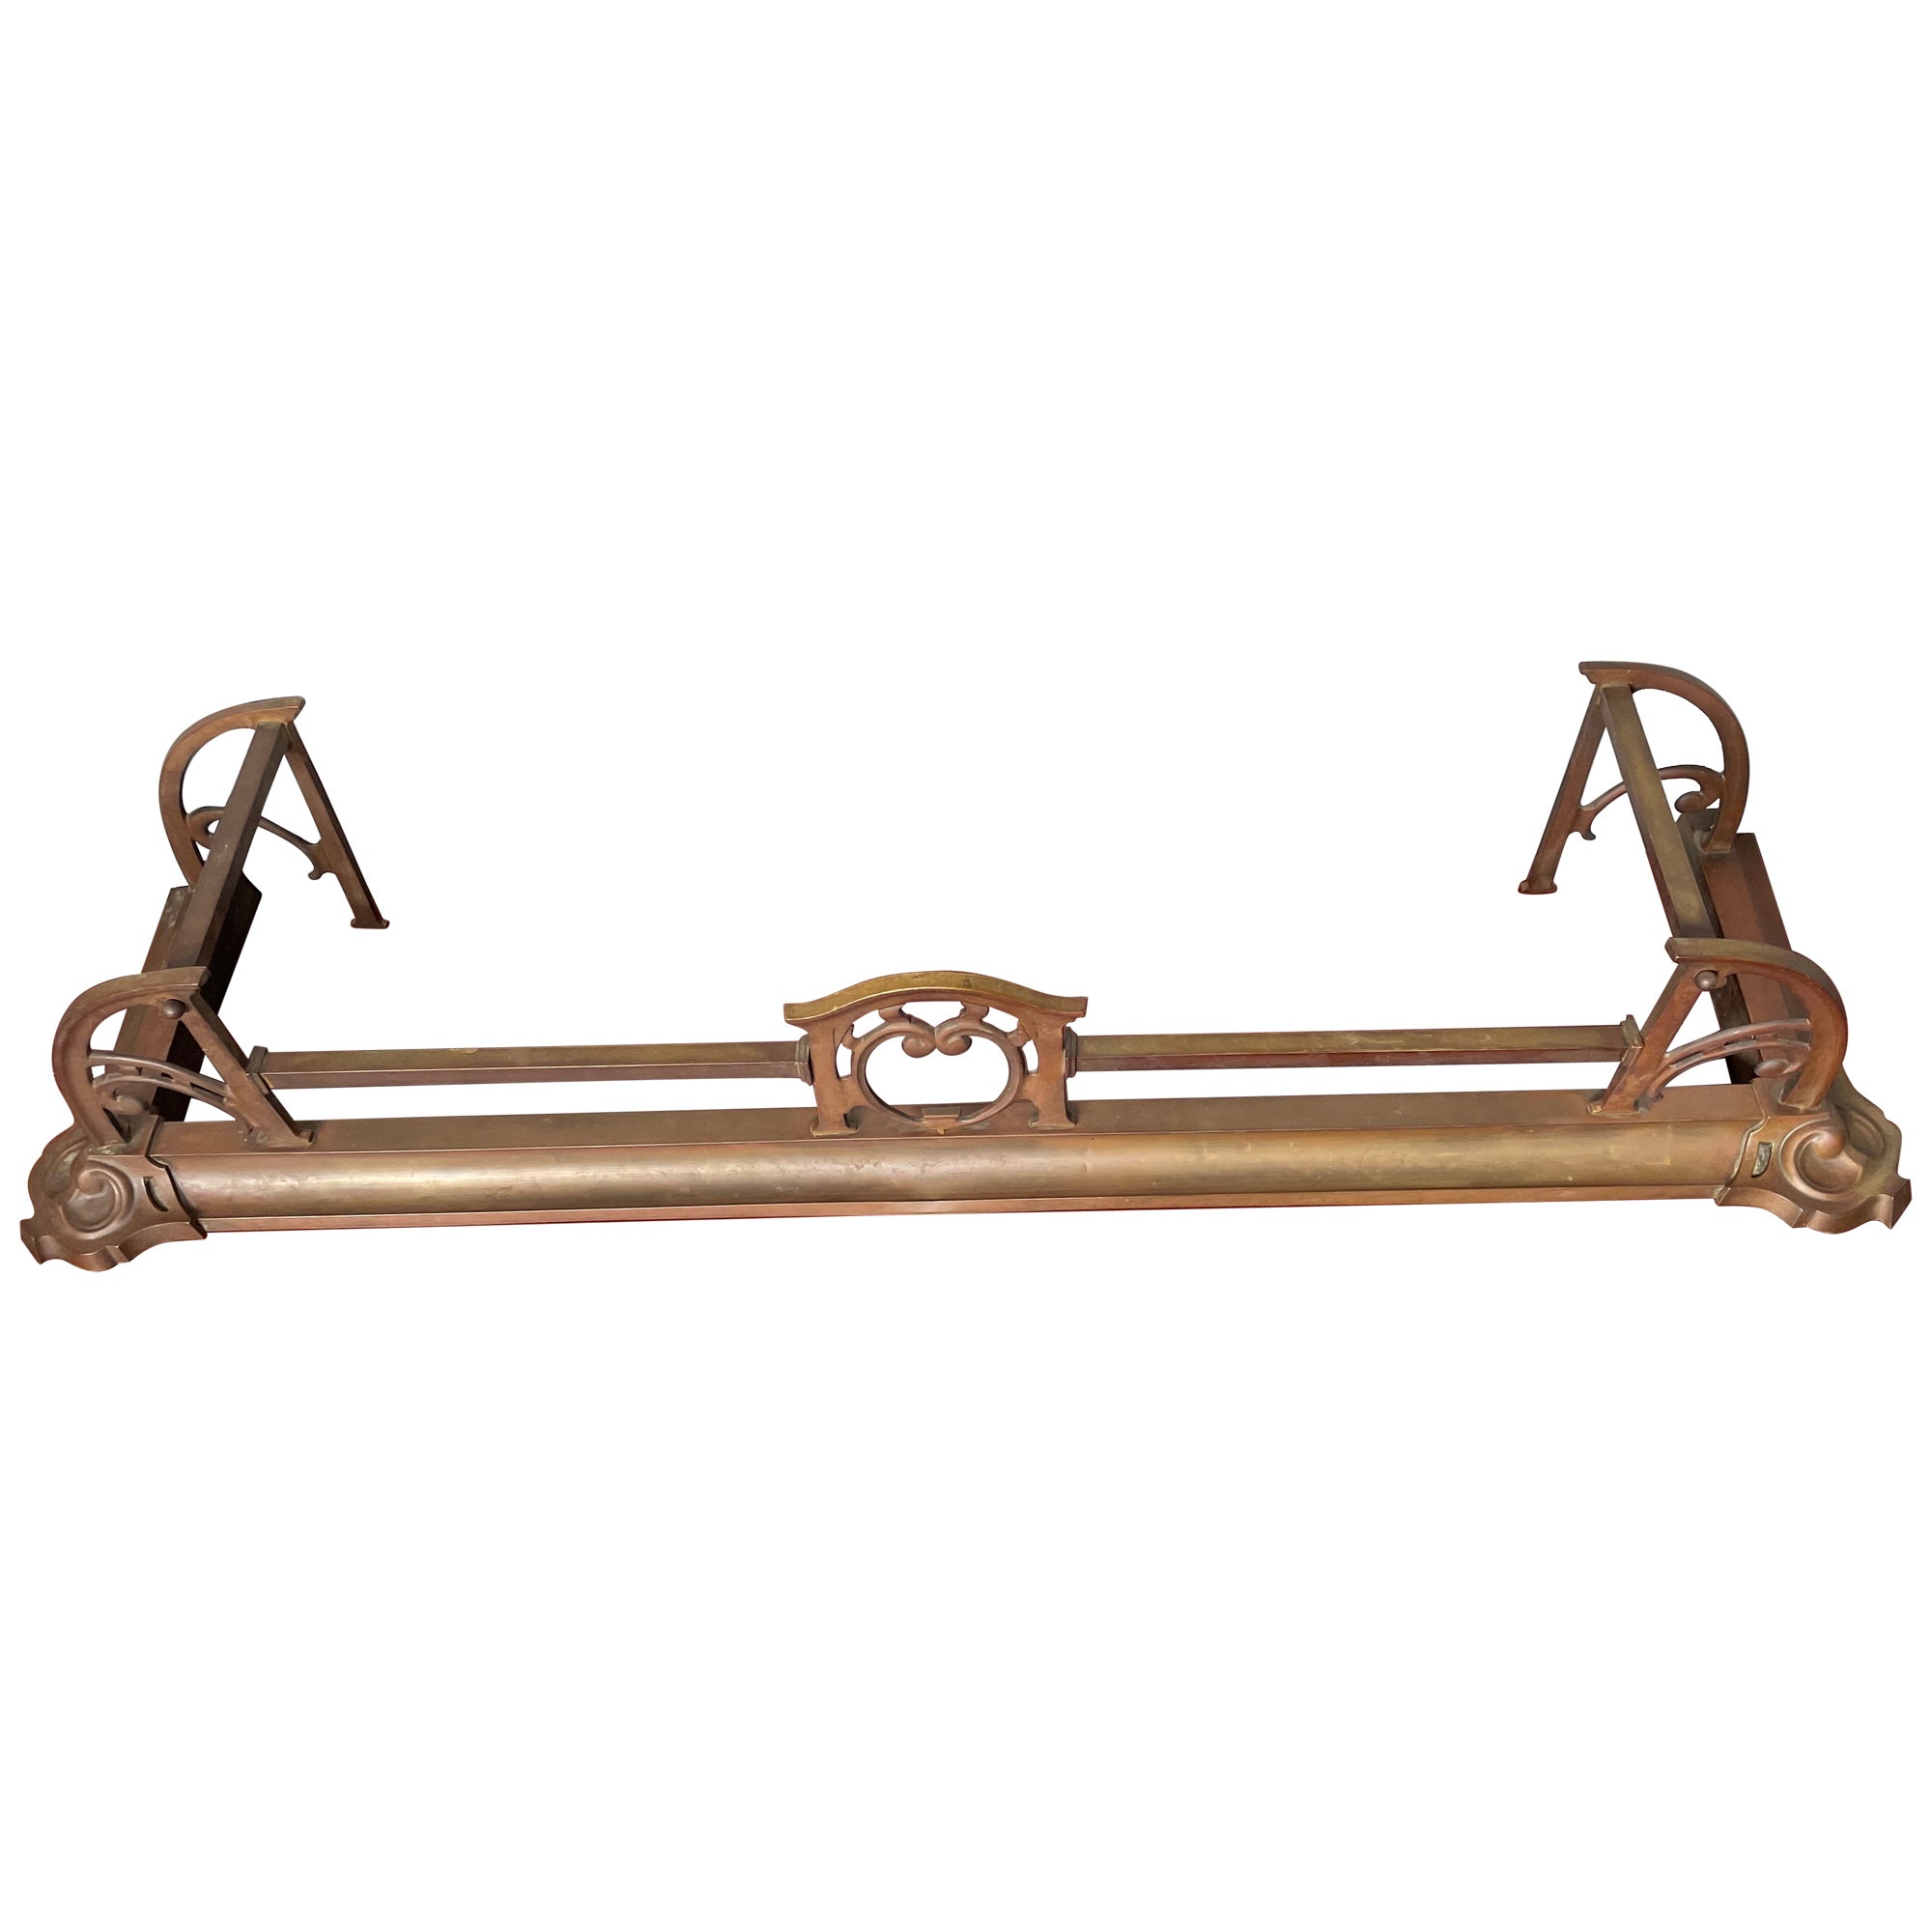 Antique Arts and Crafts Bronze & Brass Fireplace Fire Fender / Surround / Kerb For Sale